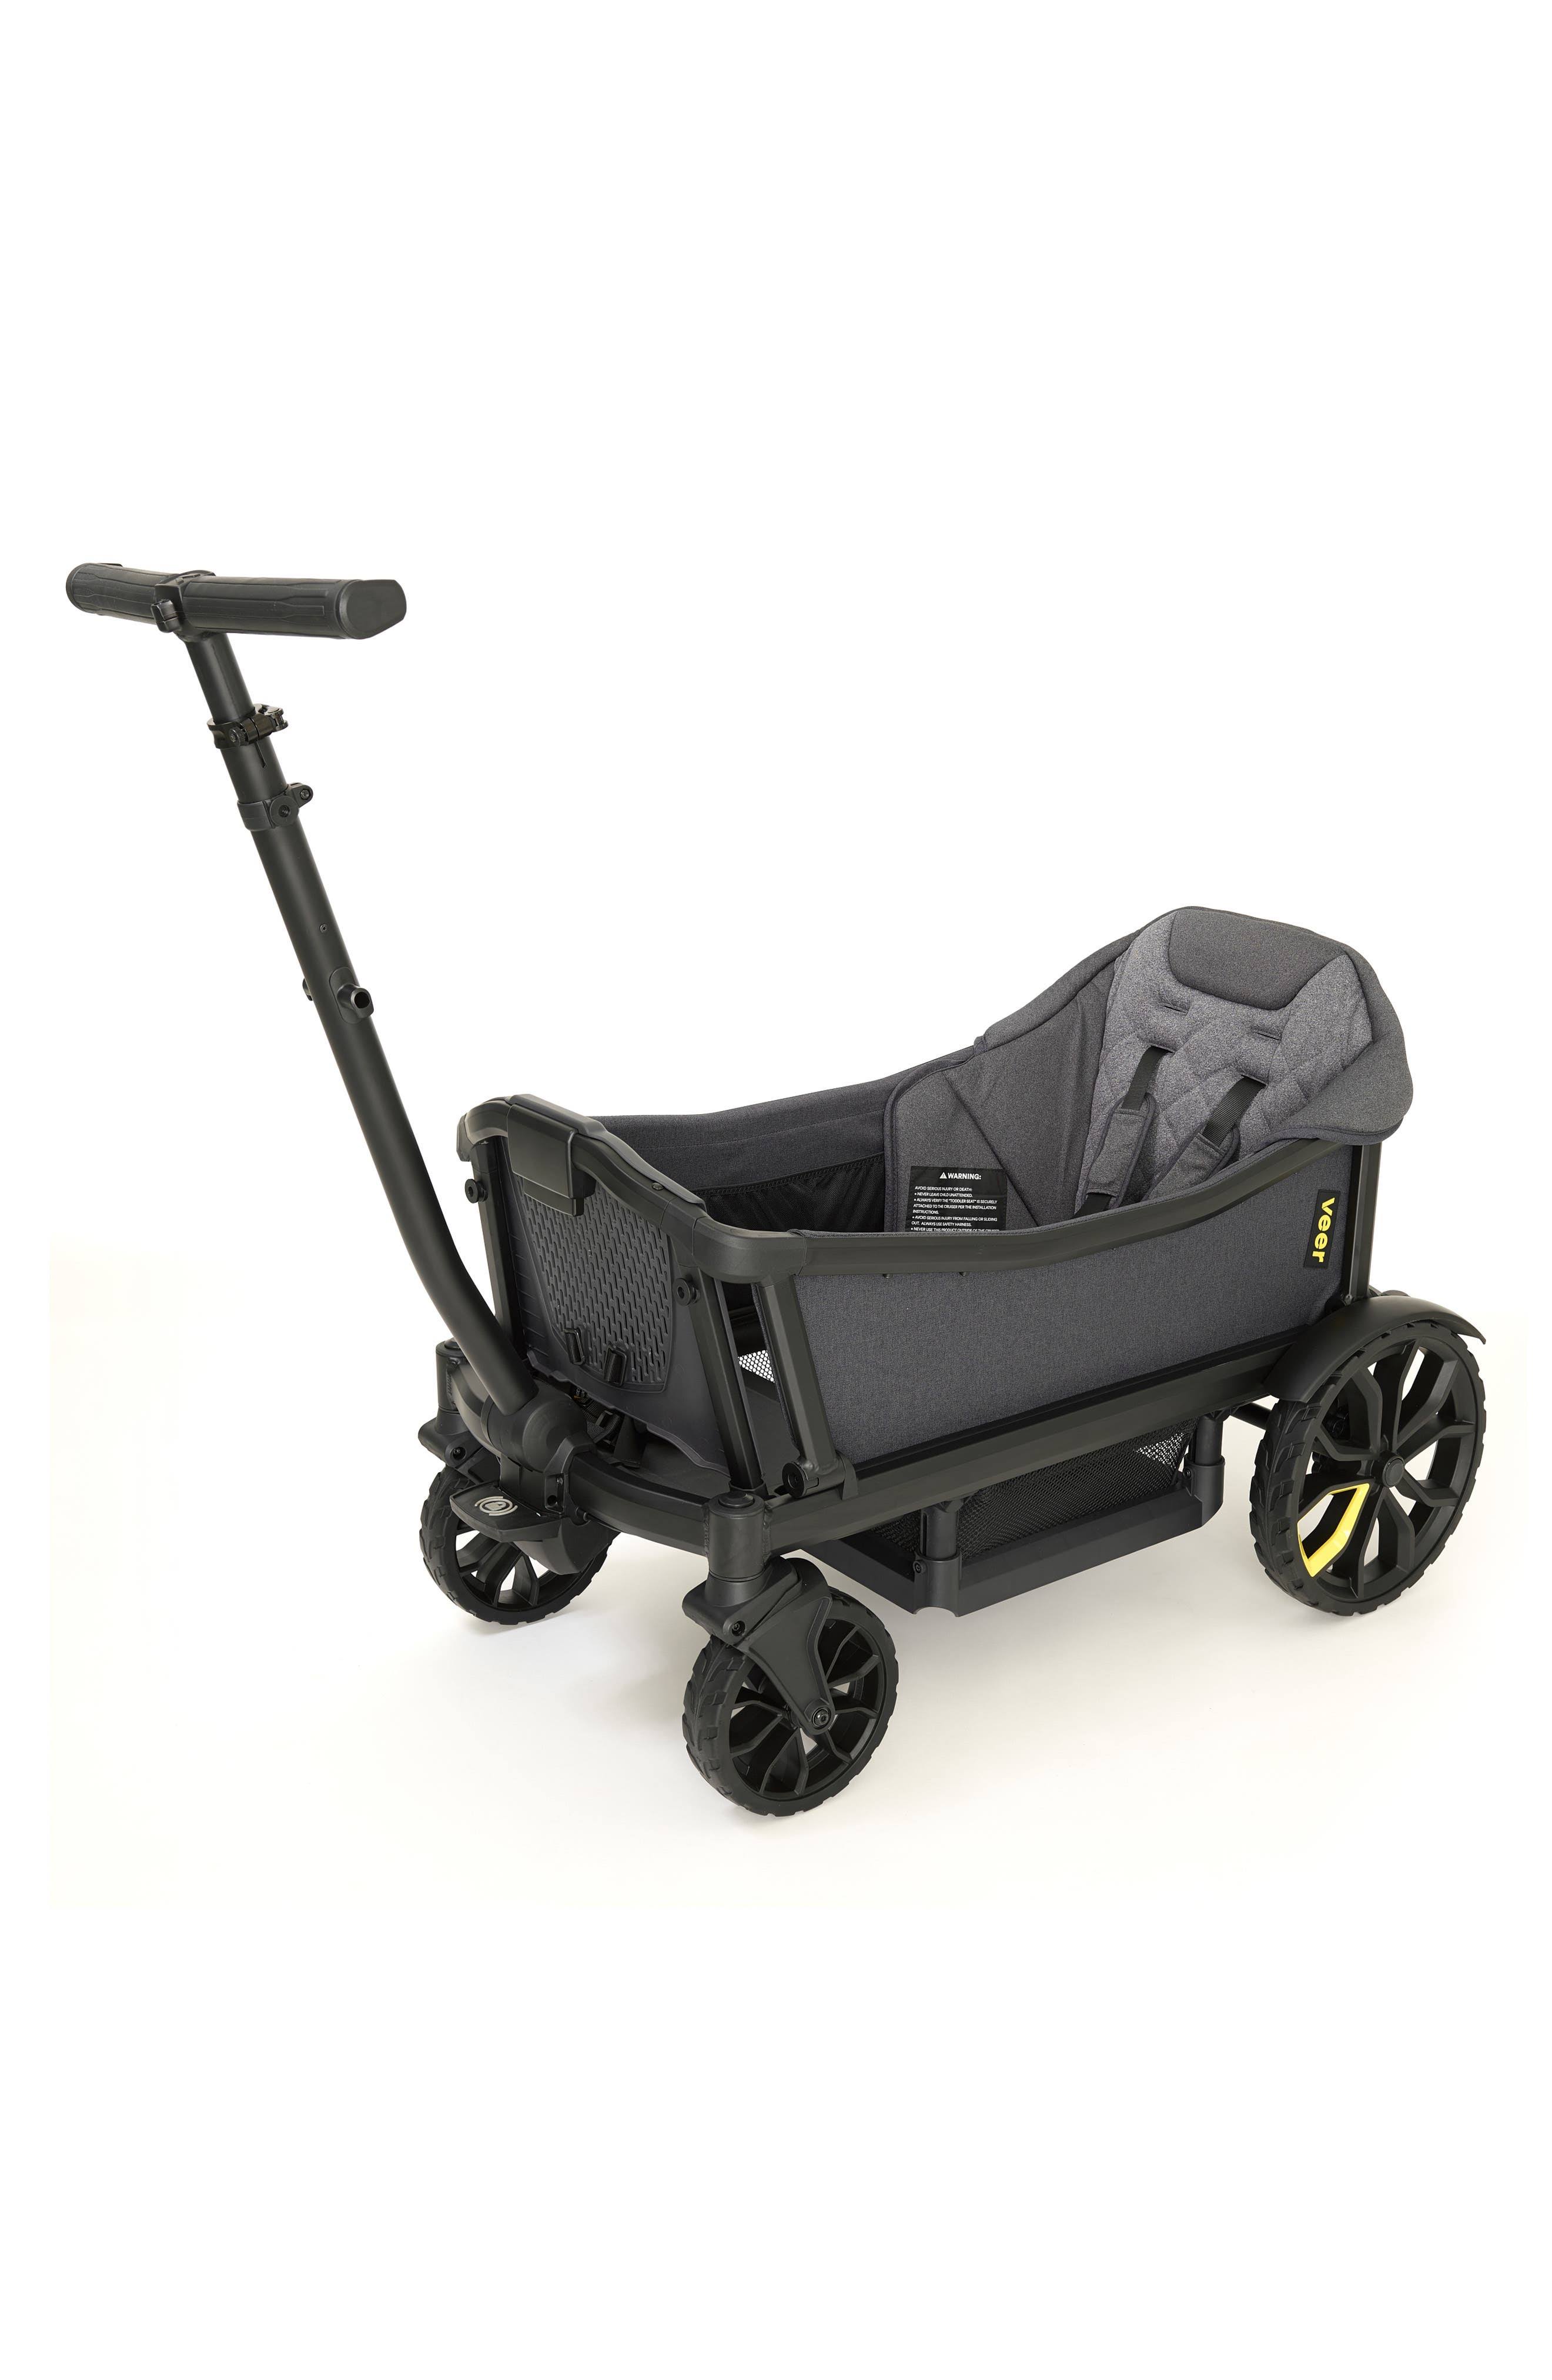 Comfort Seat For Toddlers For Veer Cruiser | Buggies, Strollers & Carriers